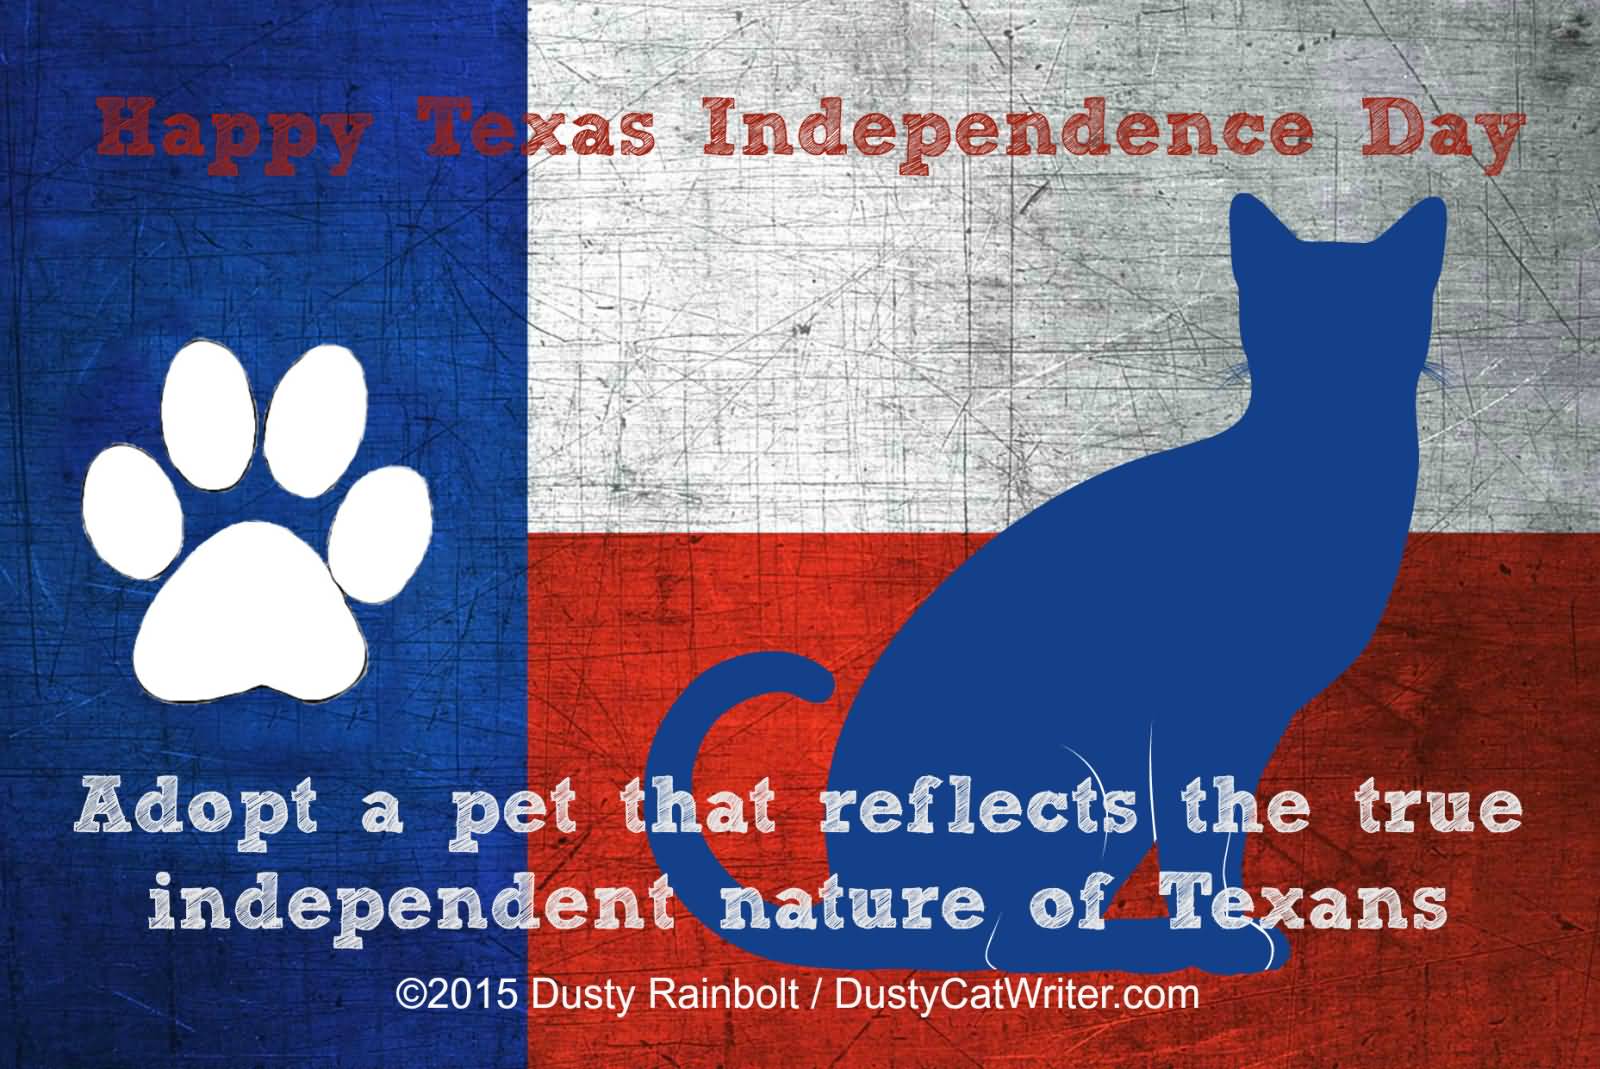 Happy Texas Independence Day Adopt A Pet That Reflects The True Independent Nature Of Texans